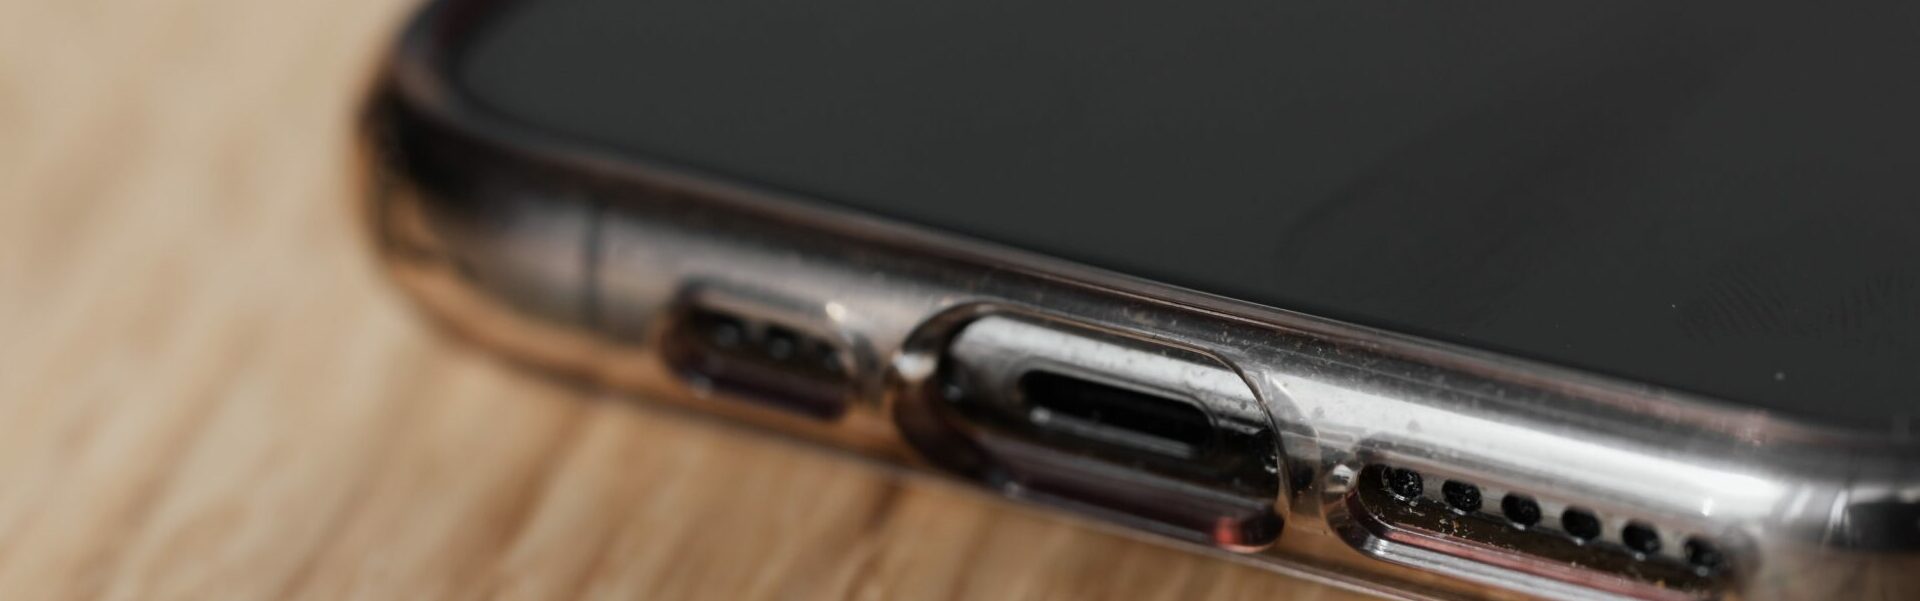 Close-up of a smartphone with a broken charging port.